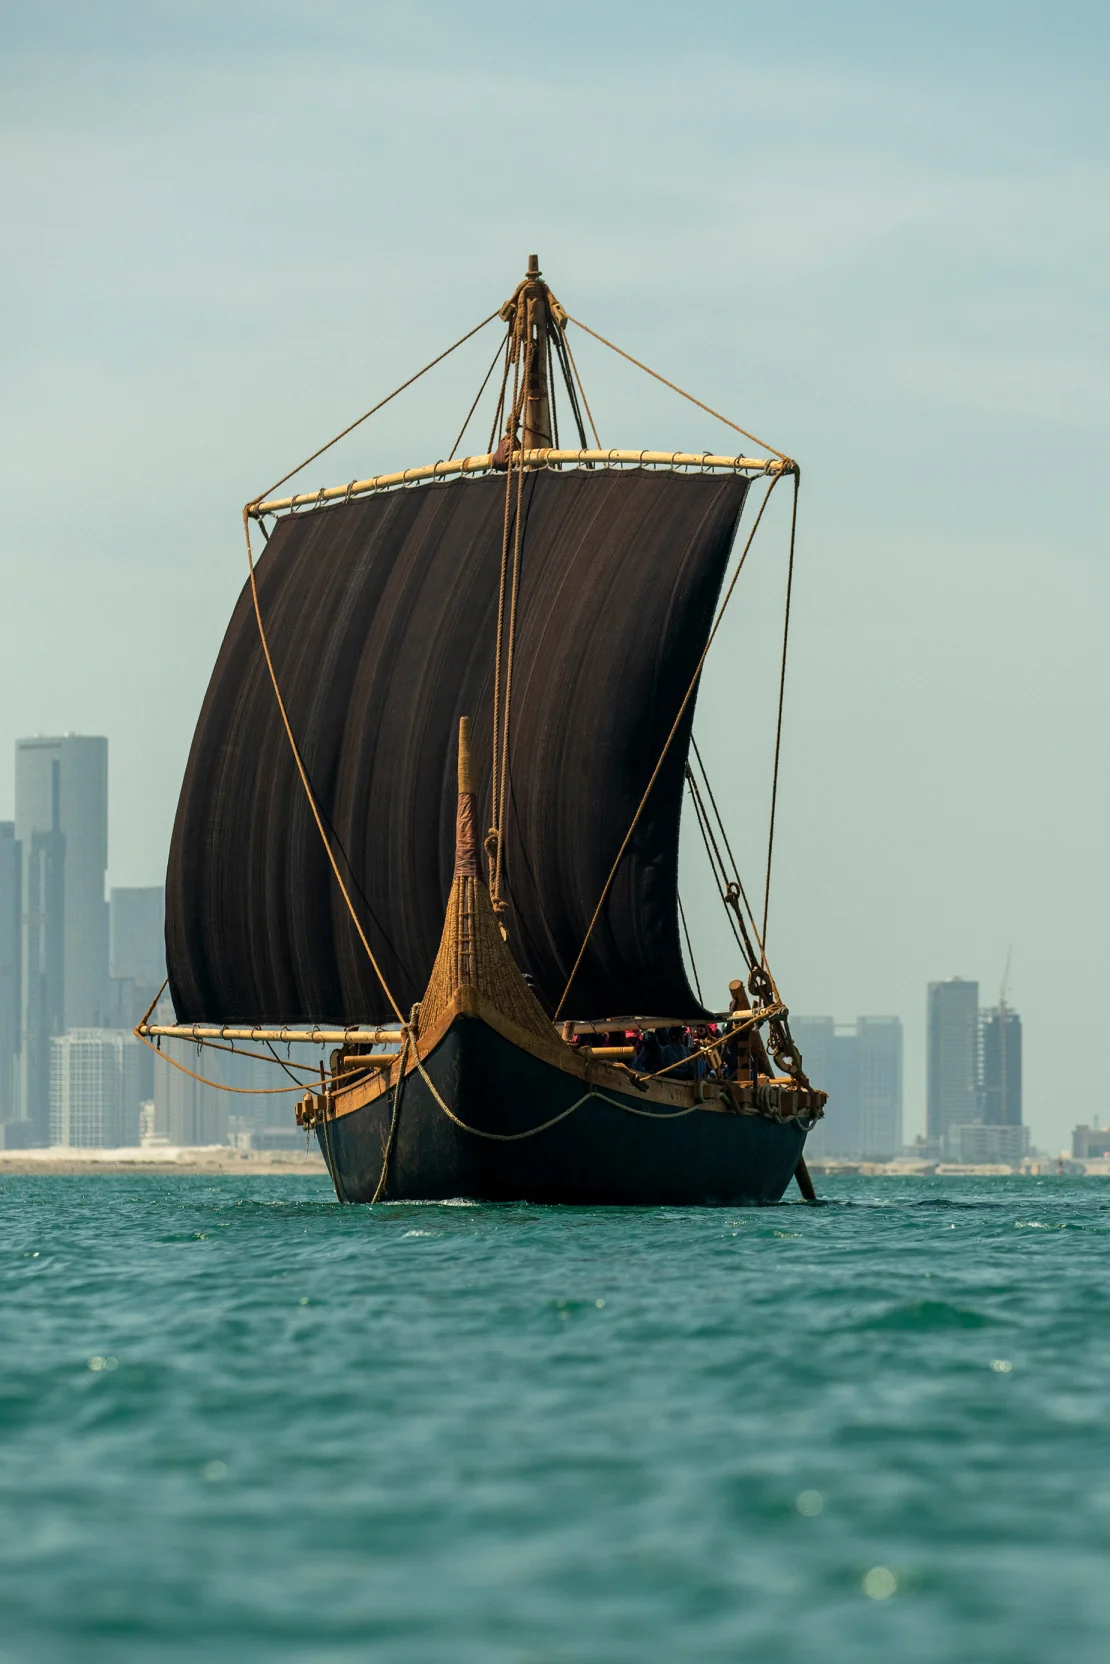 Reconstructed Bronze Age Ship Sails Again